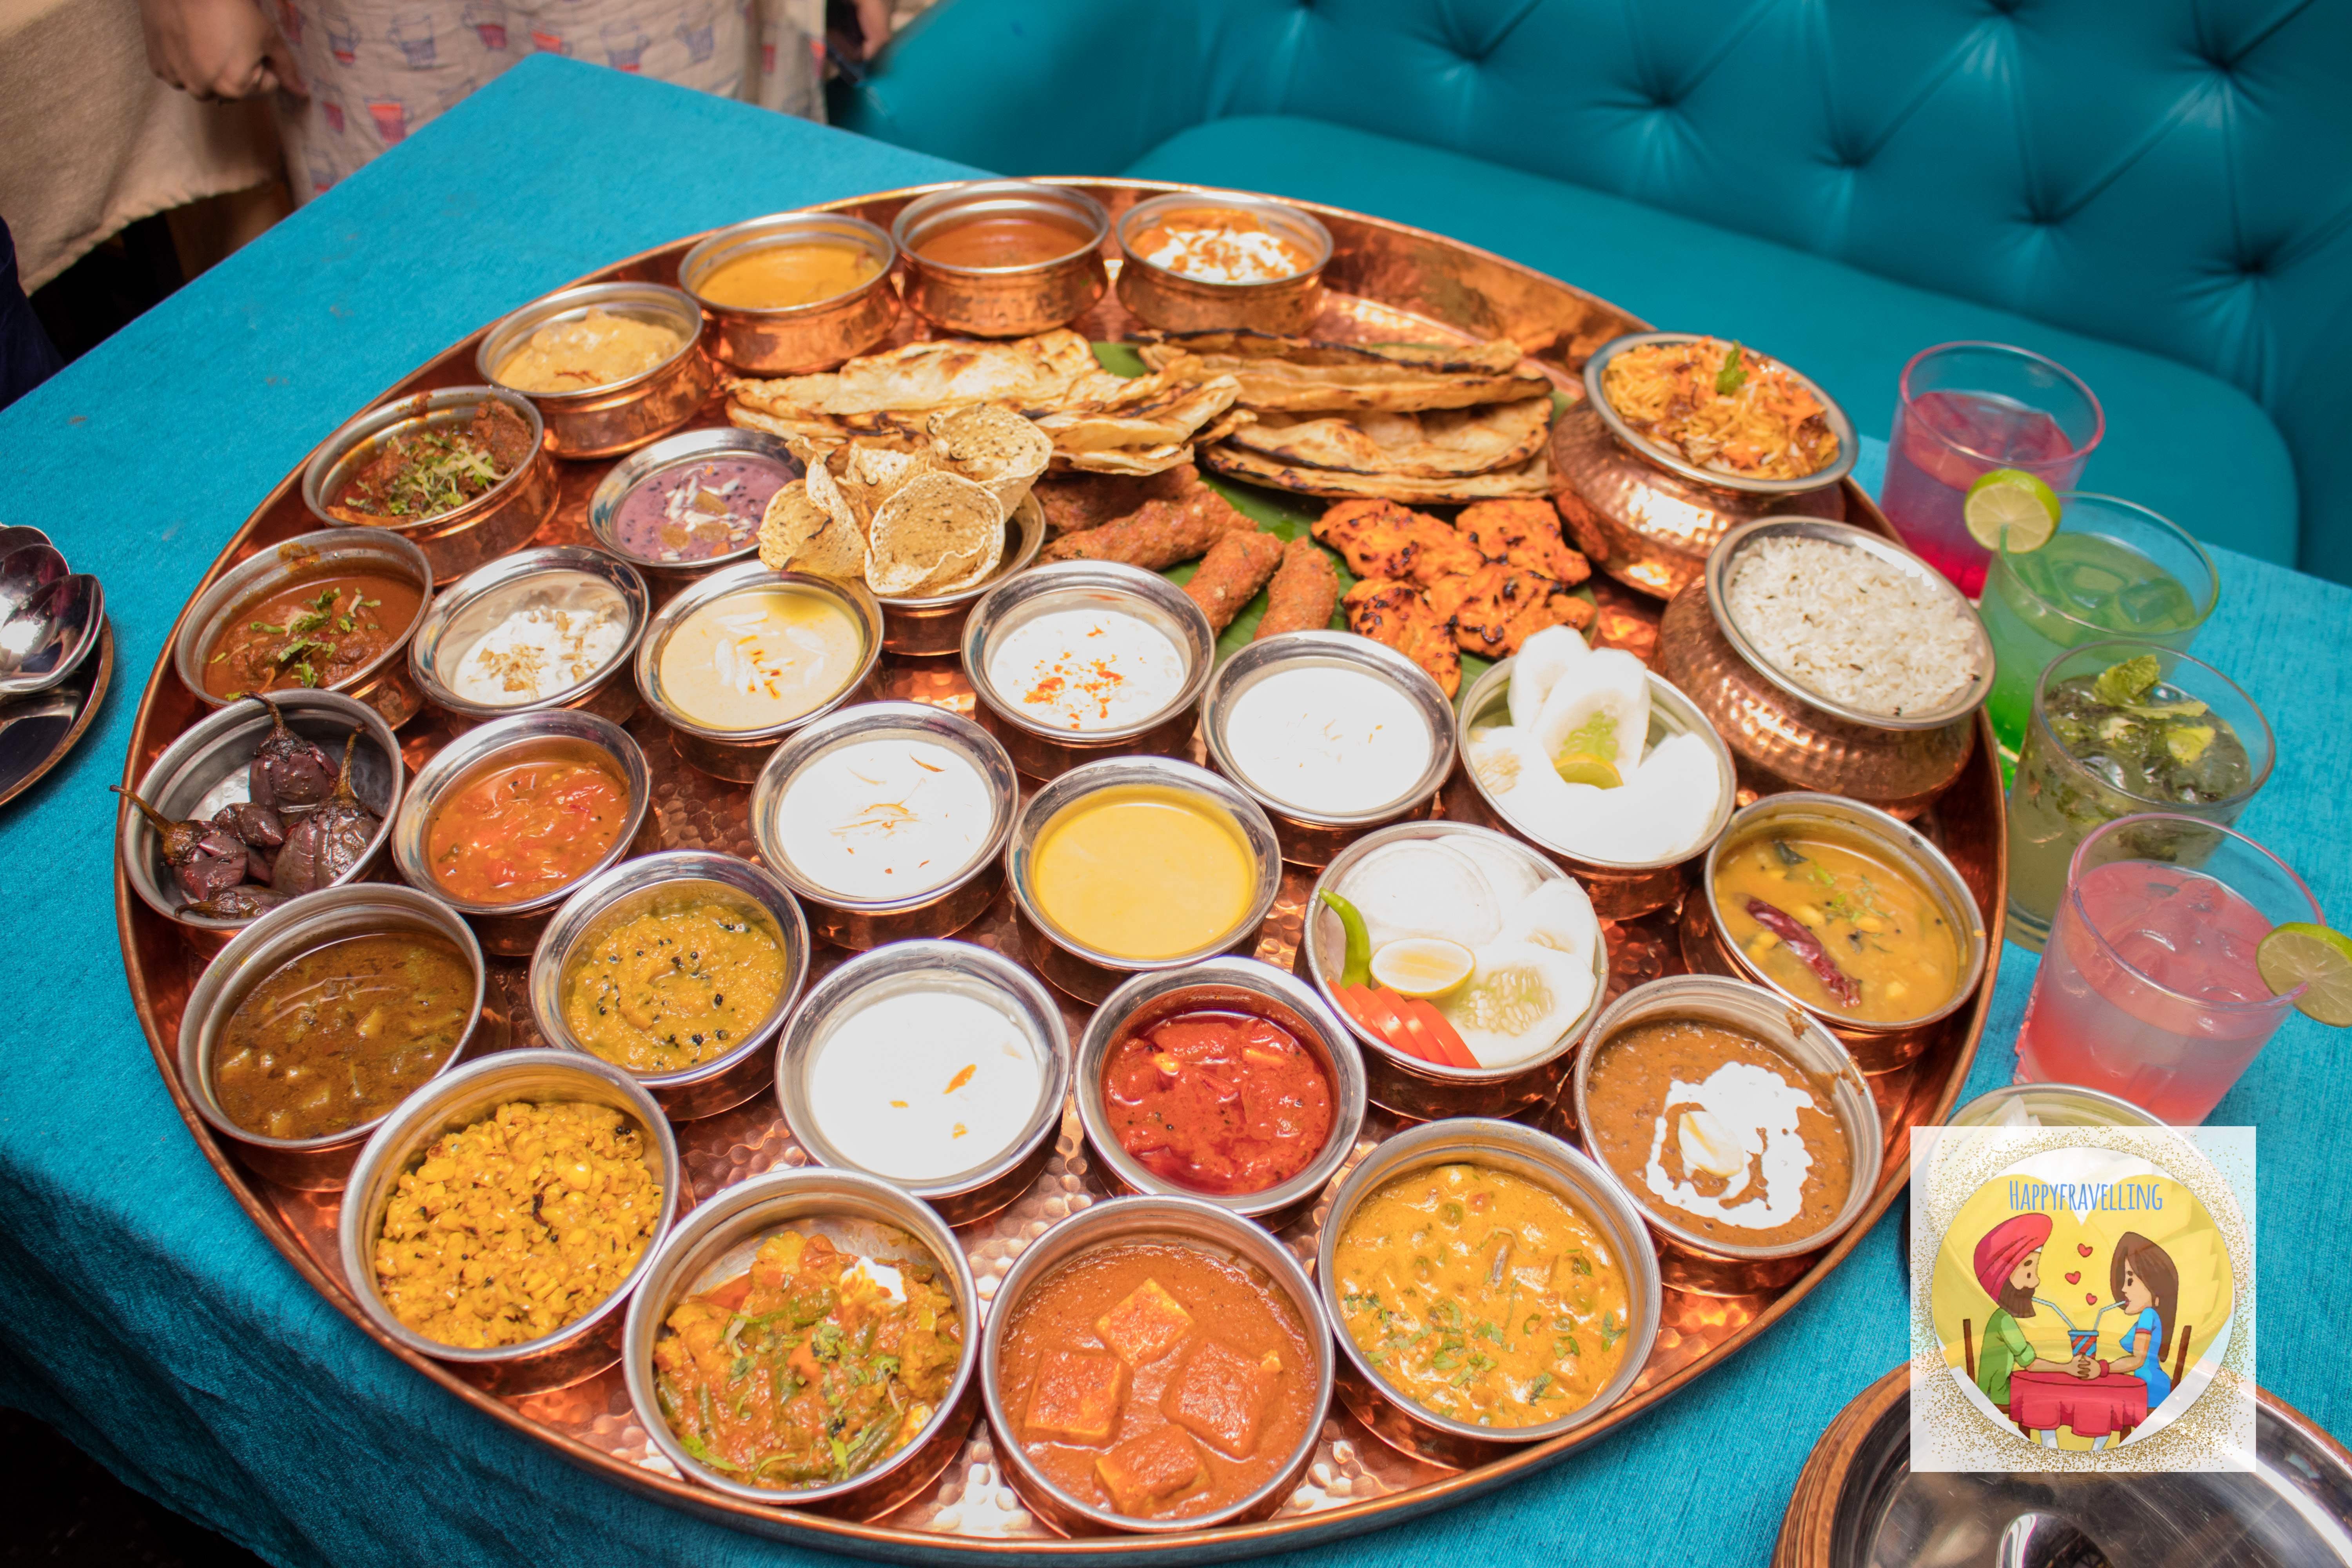 Food,Dish,Cuisine,Meal,Ingredient,Delicacy,Indian cuisine,Rajasthani cuisine,Chinese food,Brunch